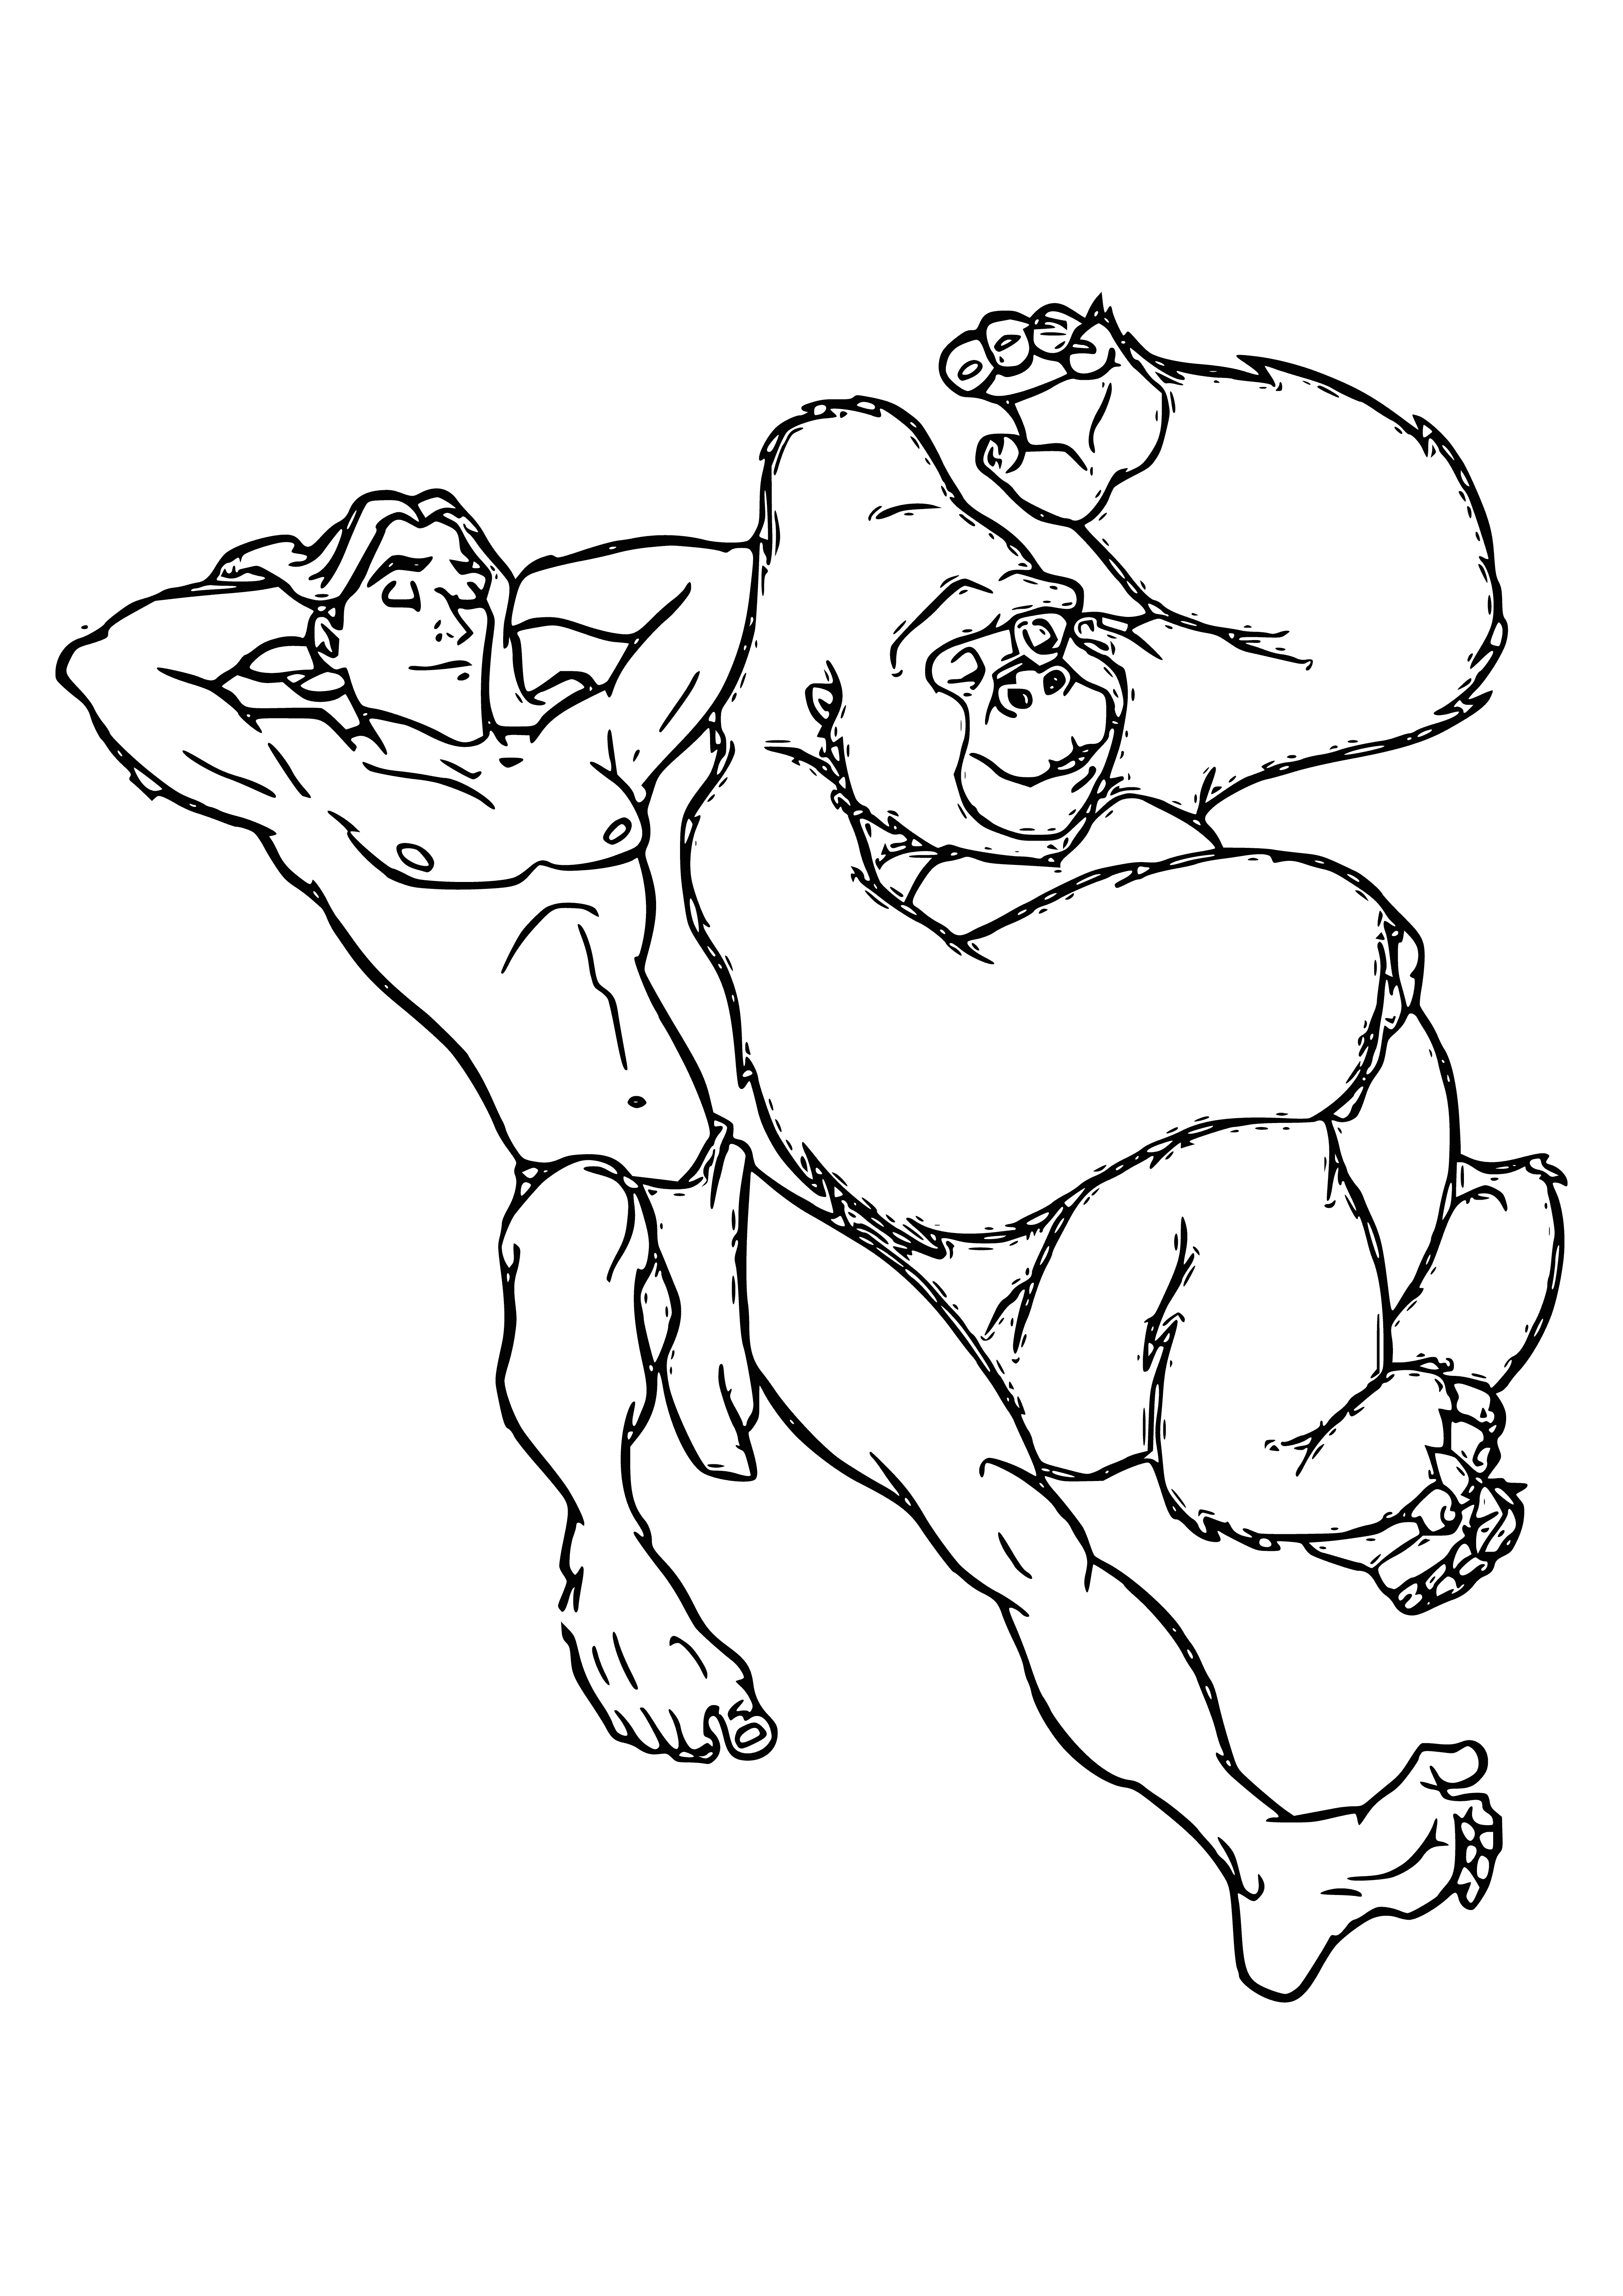 coloring page: Tarzan and Kala are embracing in a tender embrace, eyes closed and heads almost touching.